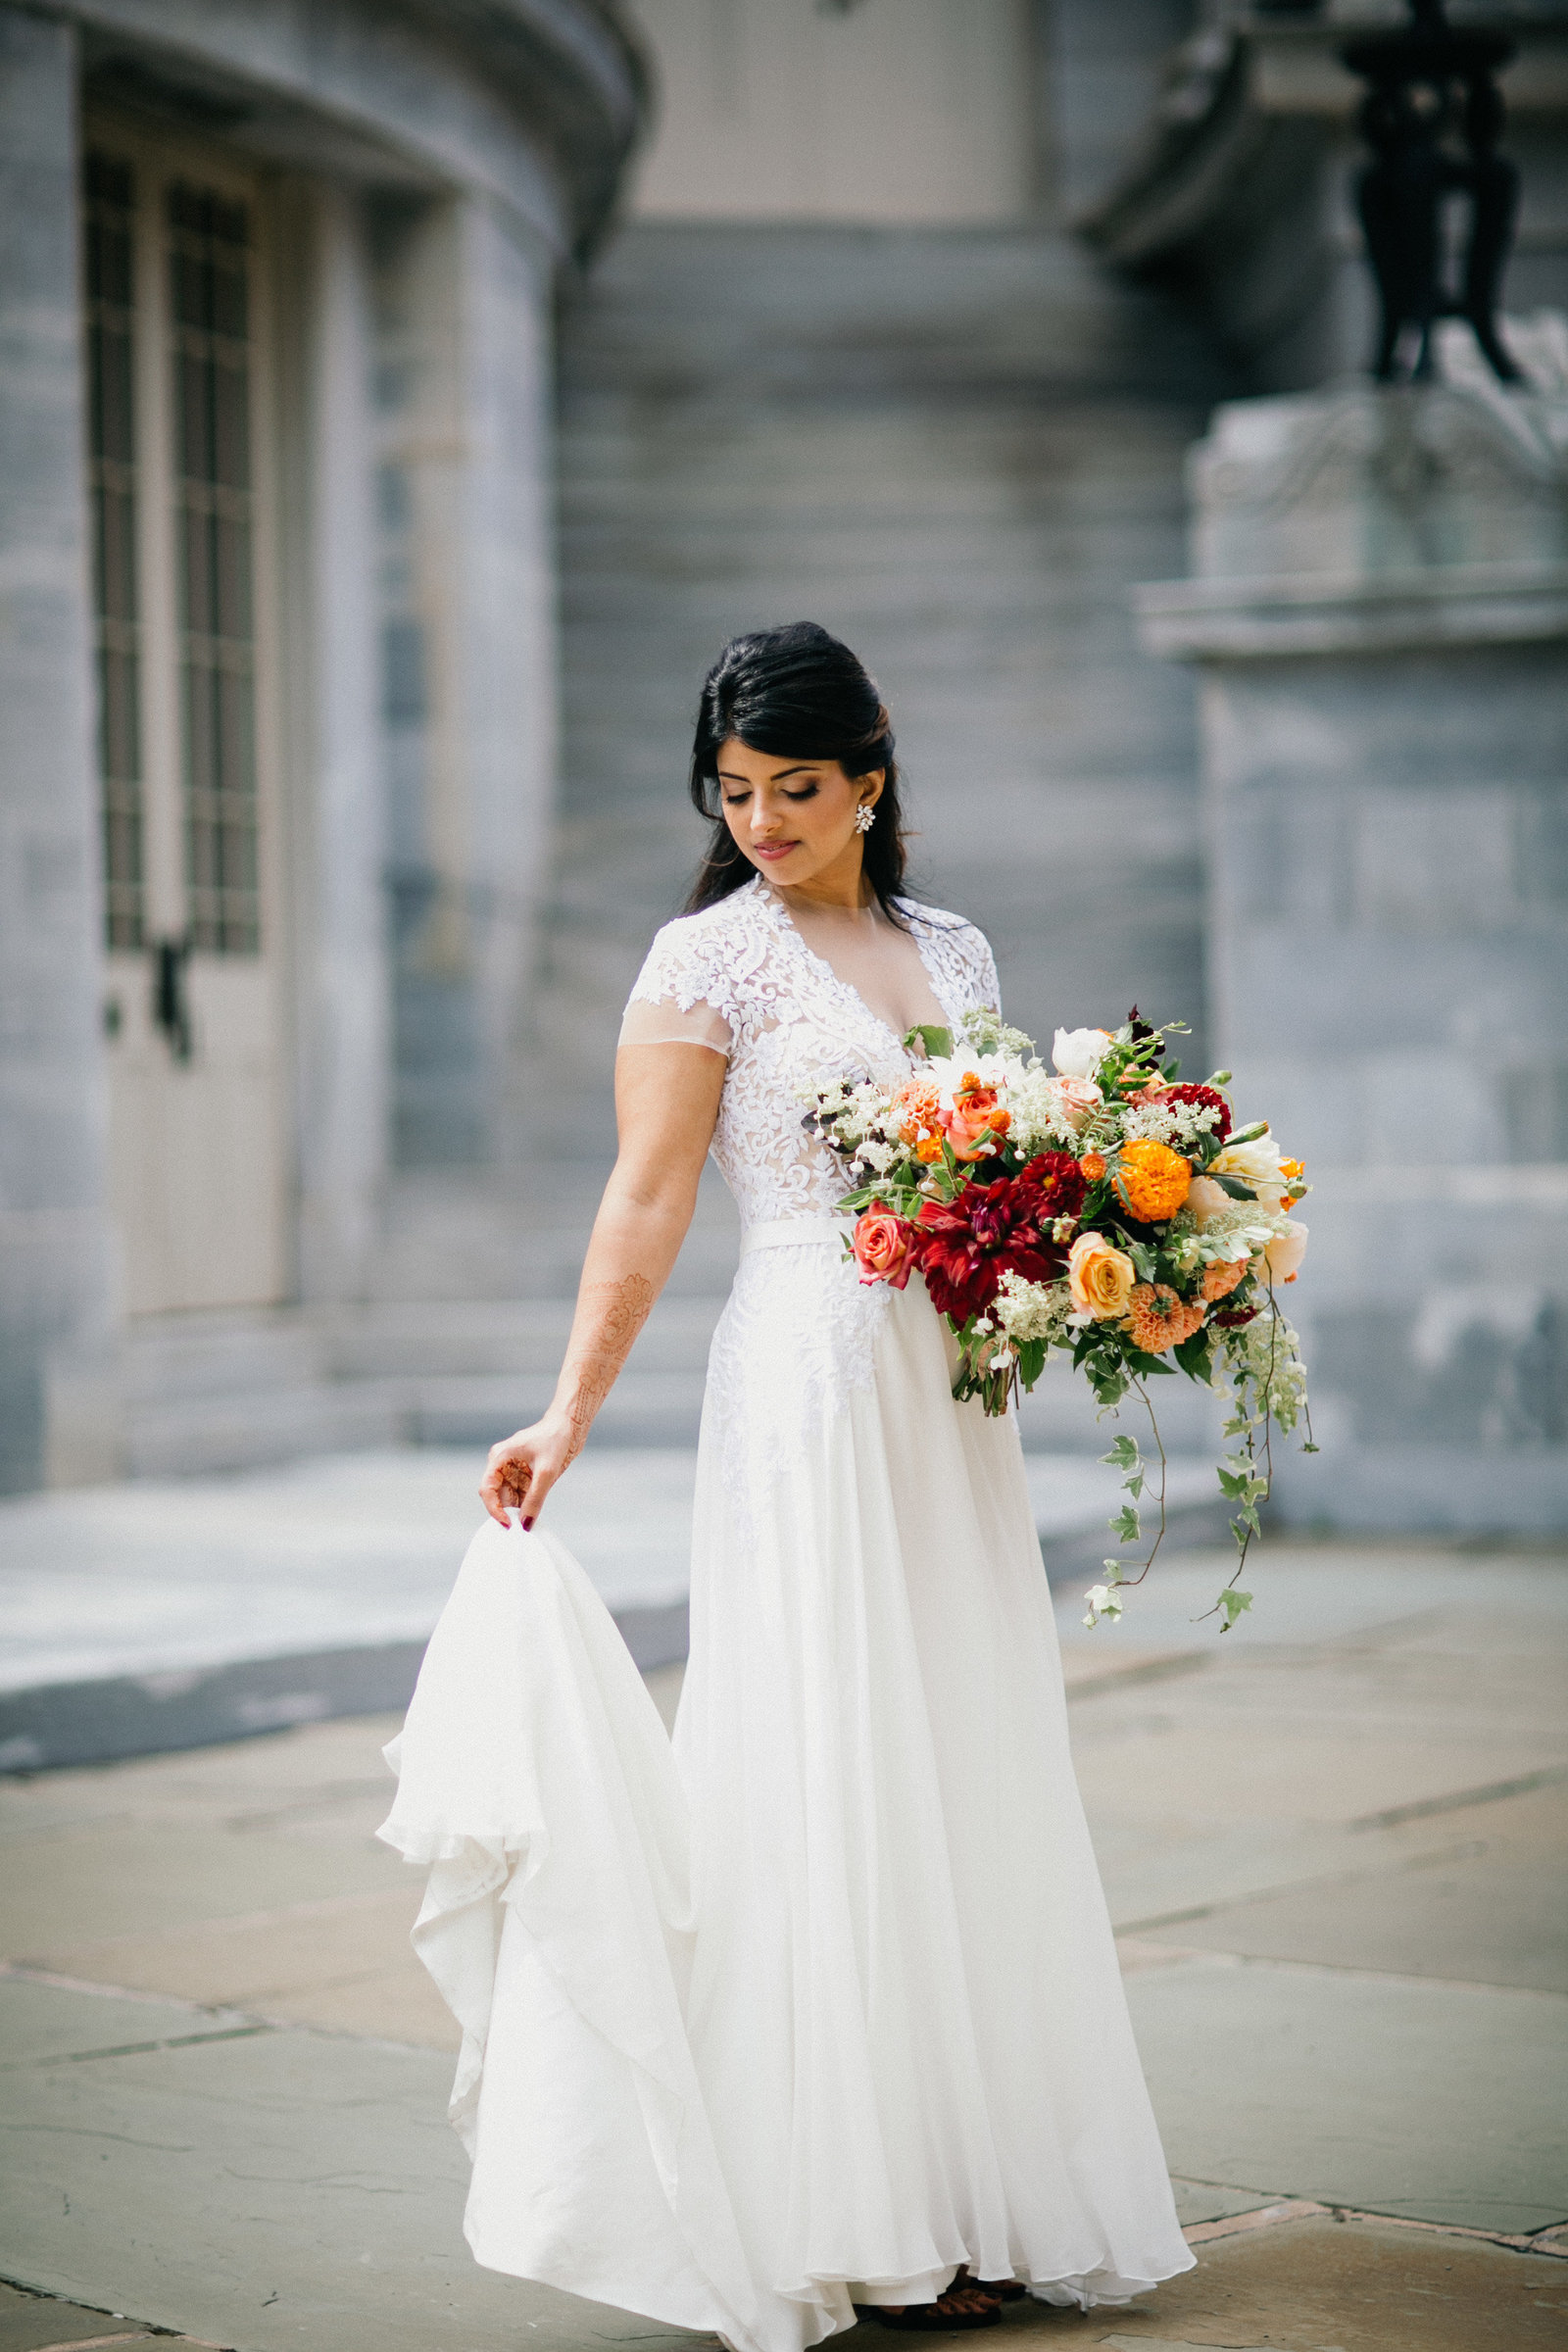 This bride's colorful bouquet stood out and popped next to her white gown.